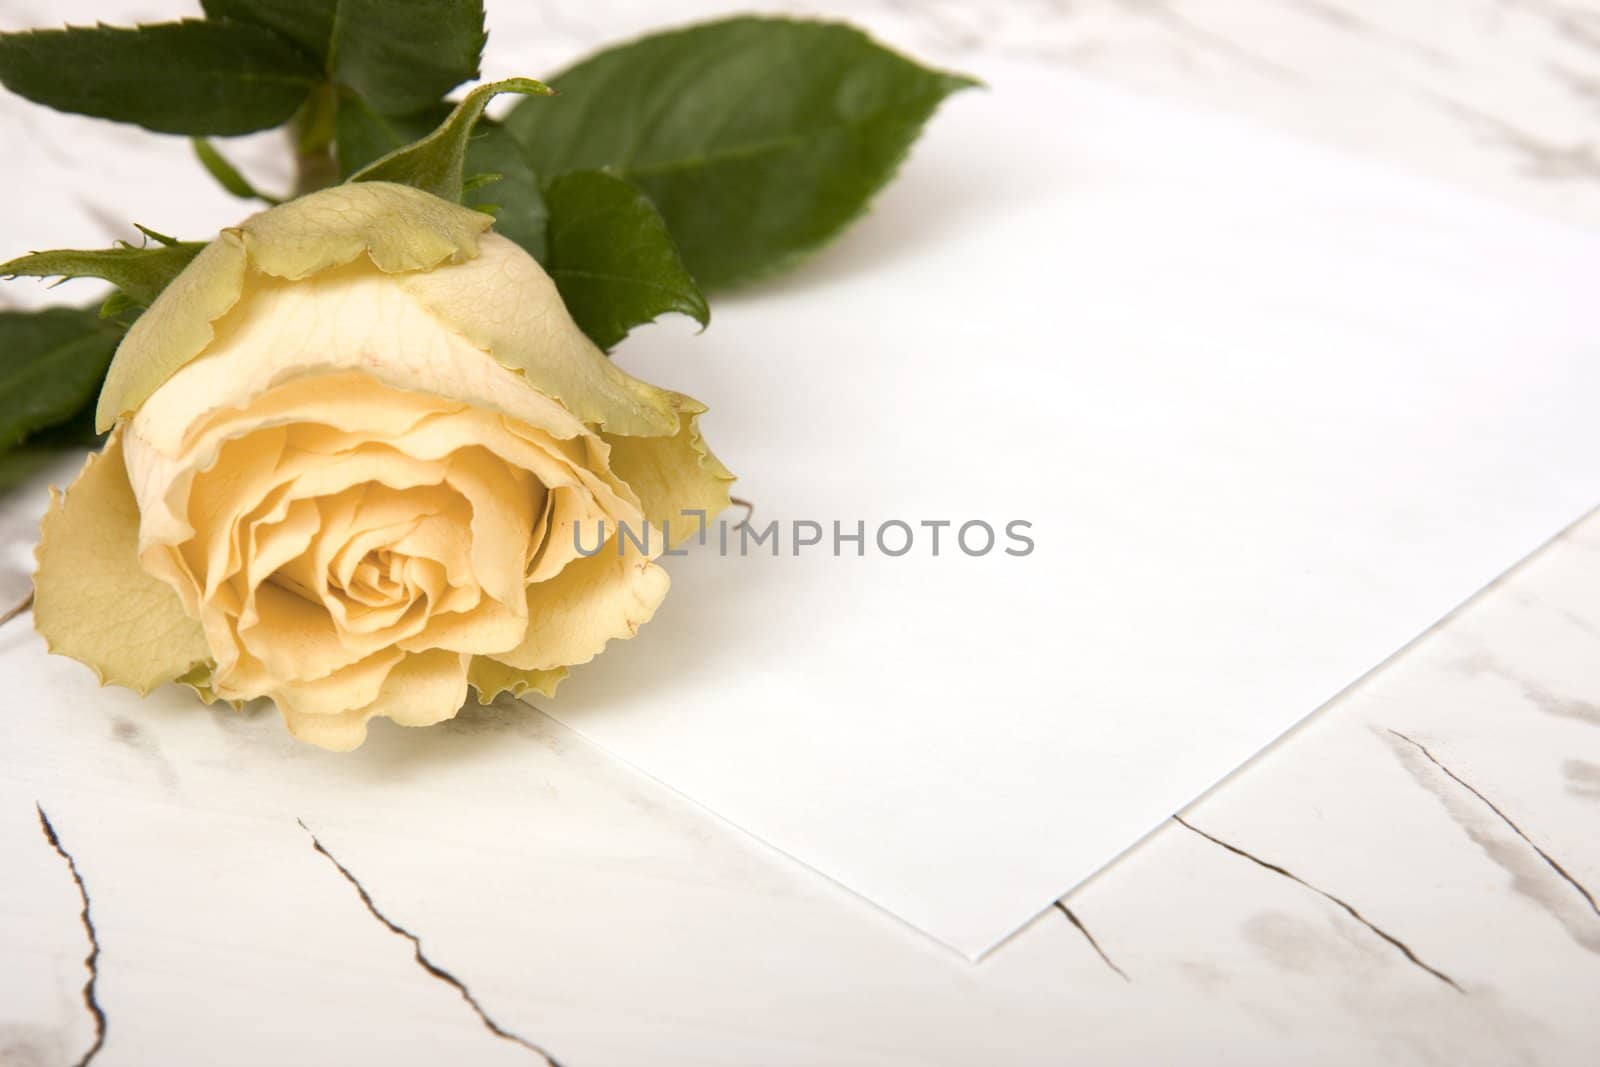 The yellow rose and sheet of paper lie on a table